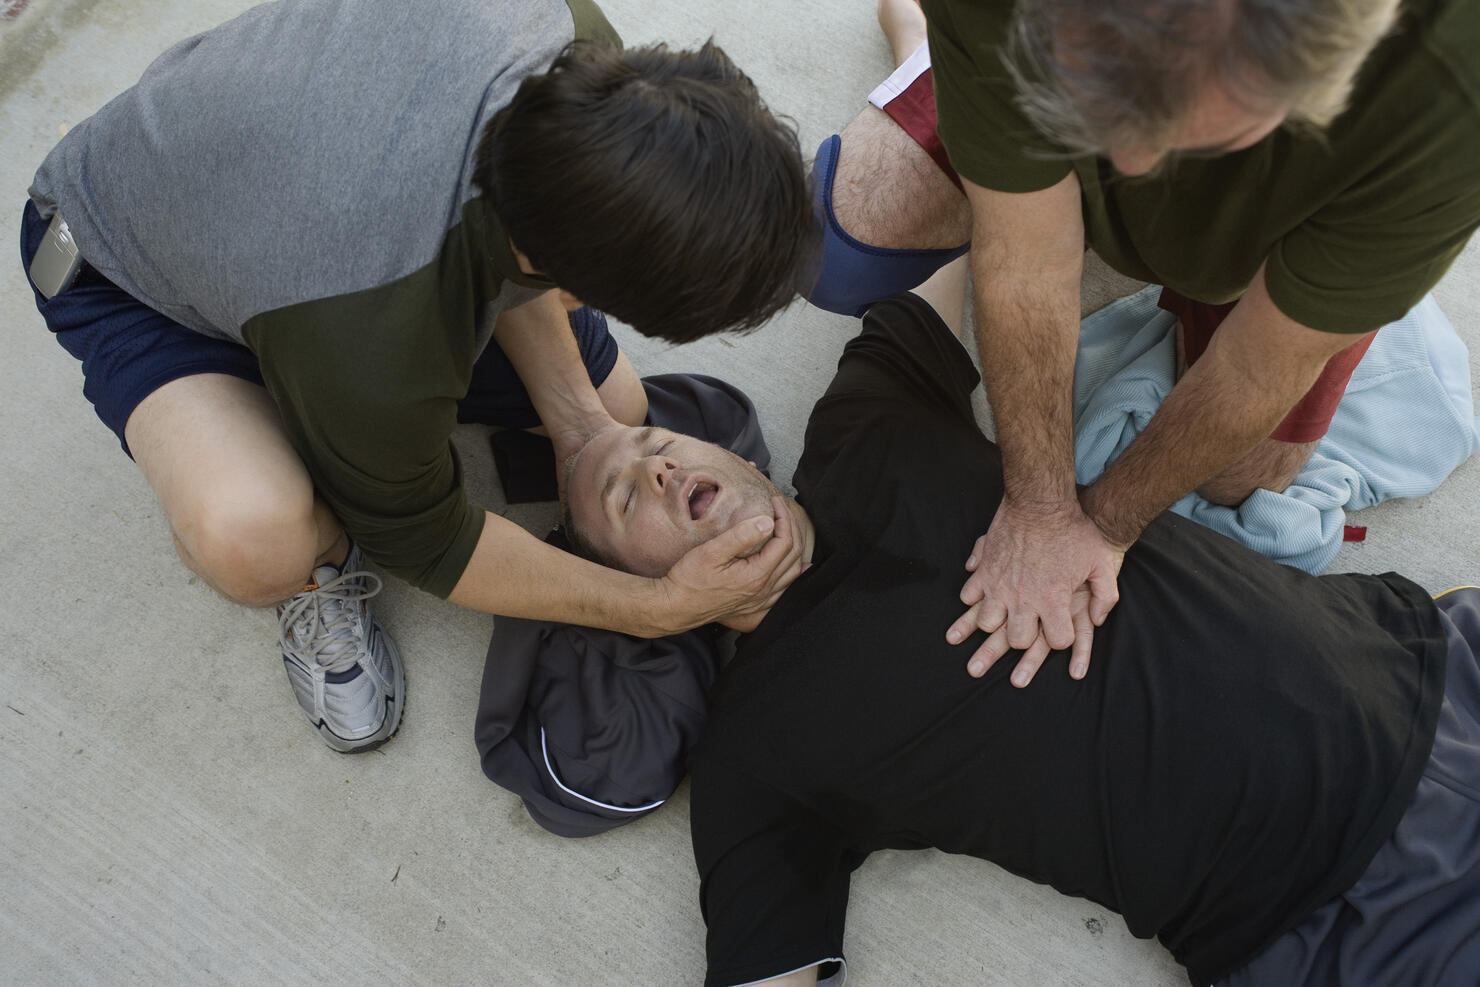 Men doing CPR on another man